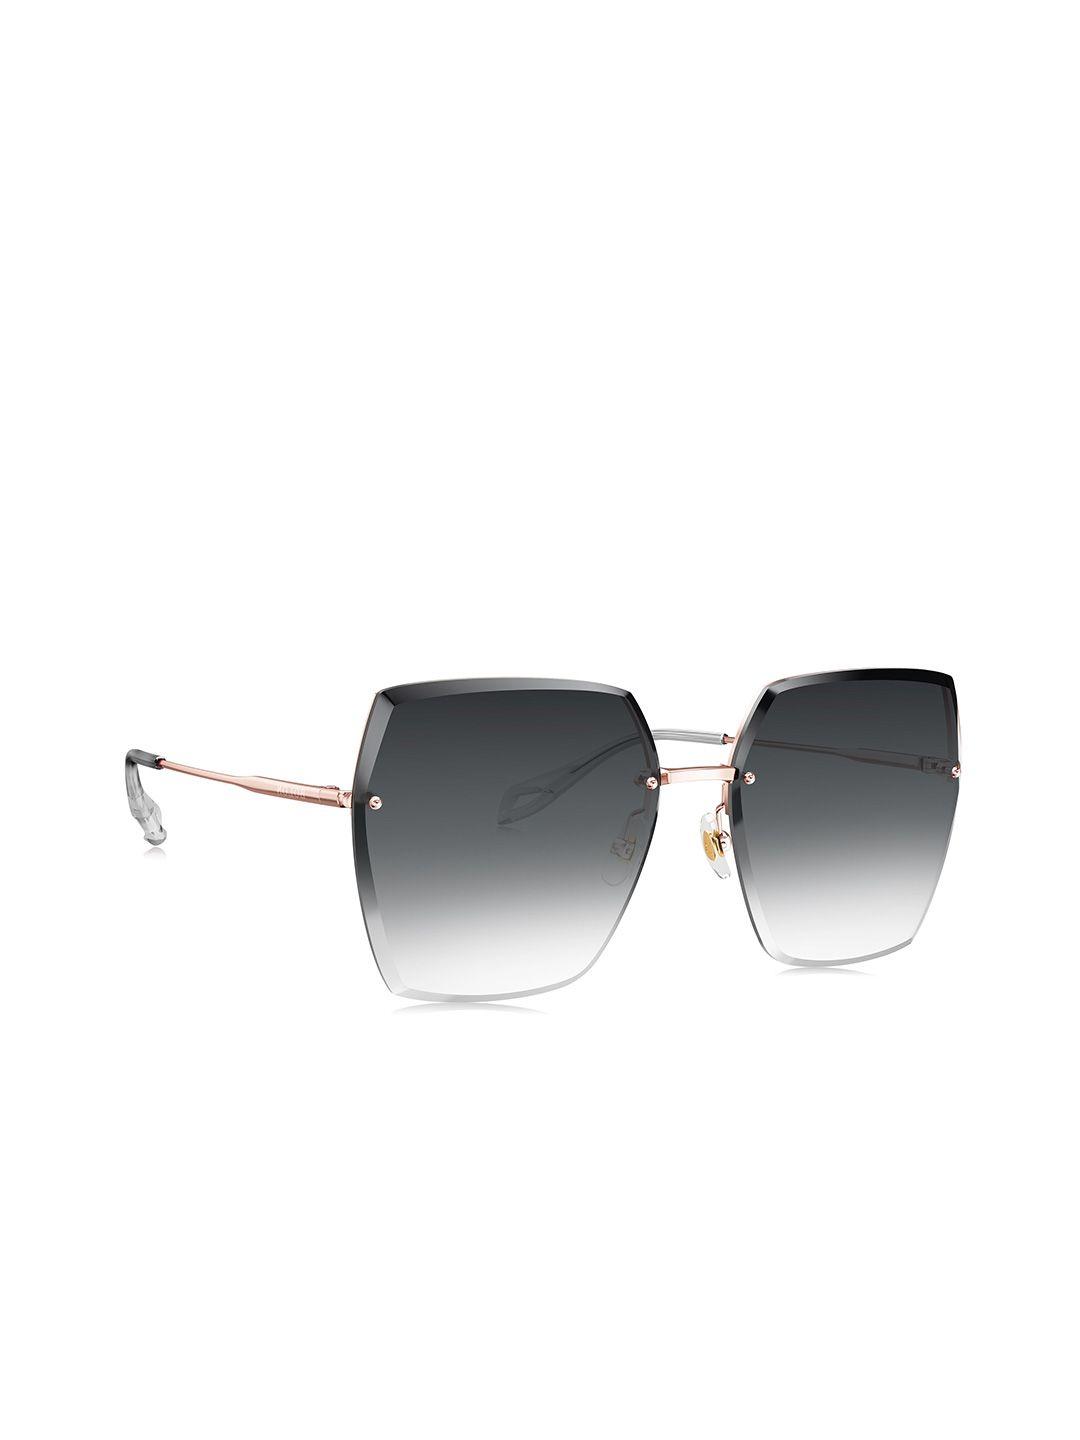 bolon eyewear women grey lens & rose gold-toned other sunglasses with uv protected lens